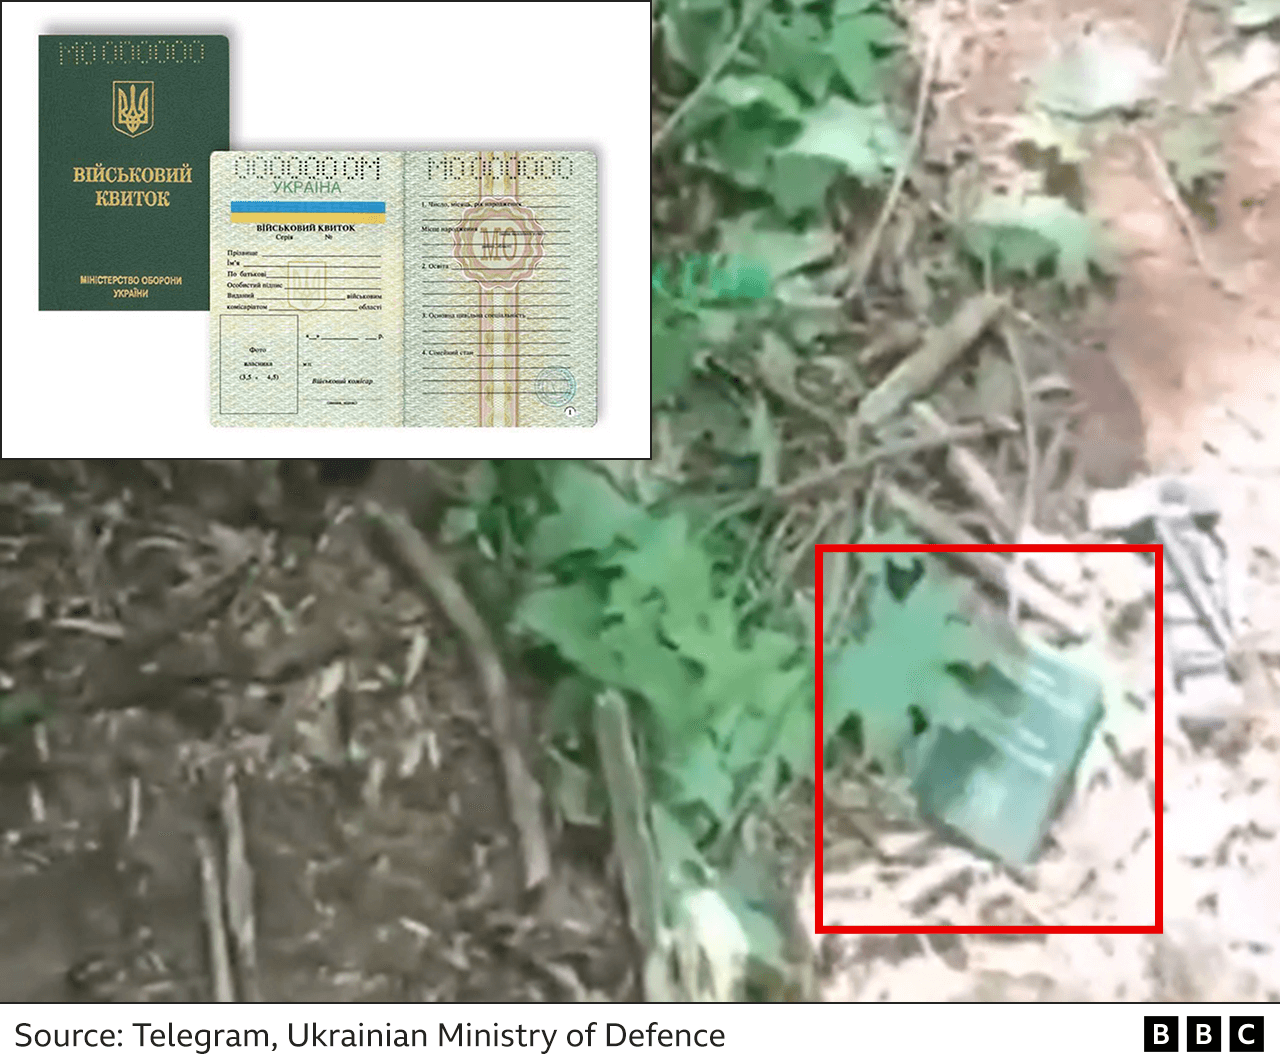 Video frame showing what appears to be a Ukrainian military ticket on the ground, which is issued to soldiers when they are registered for military service. An inset image of a military ticket is also shown for reference